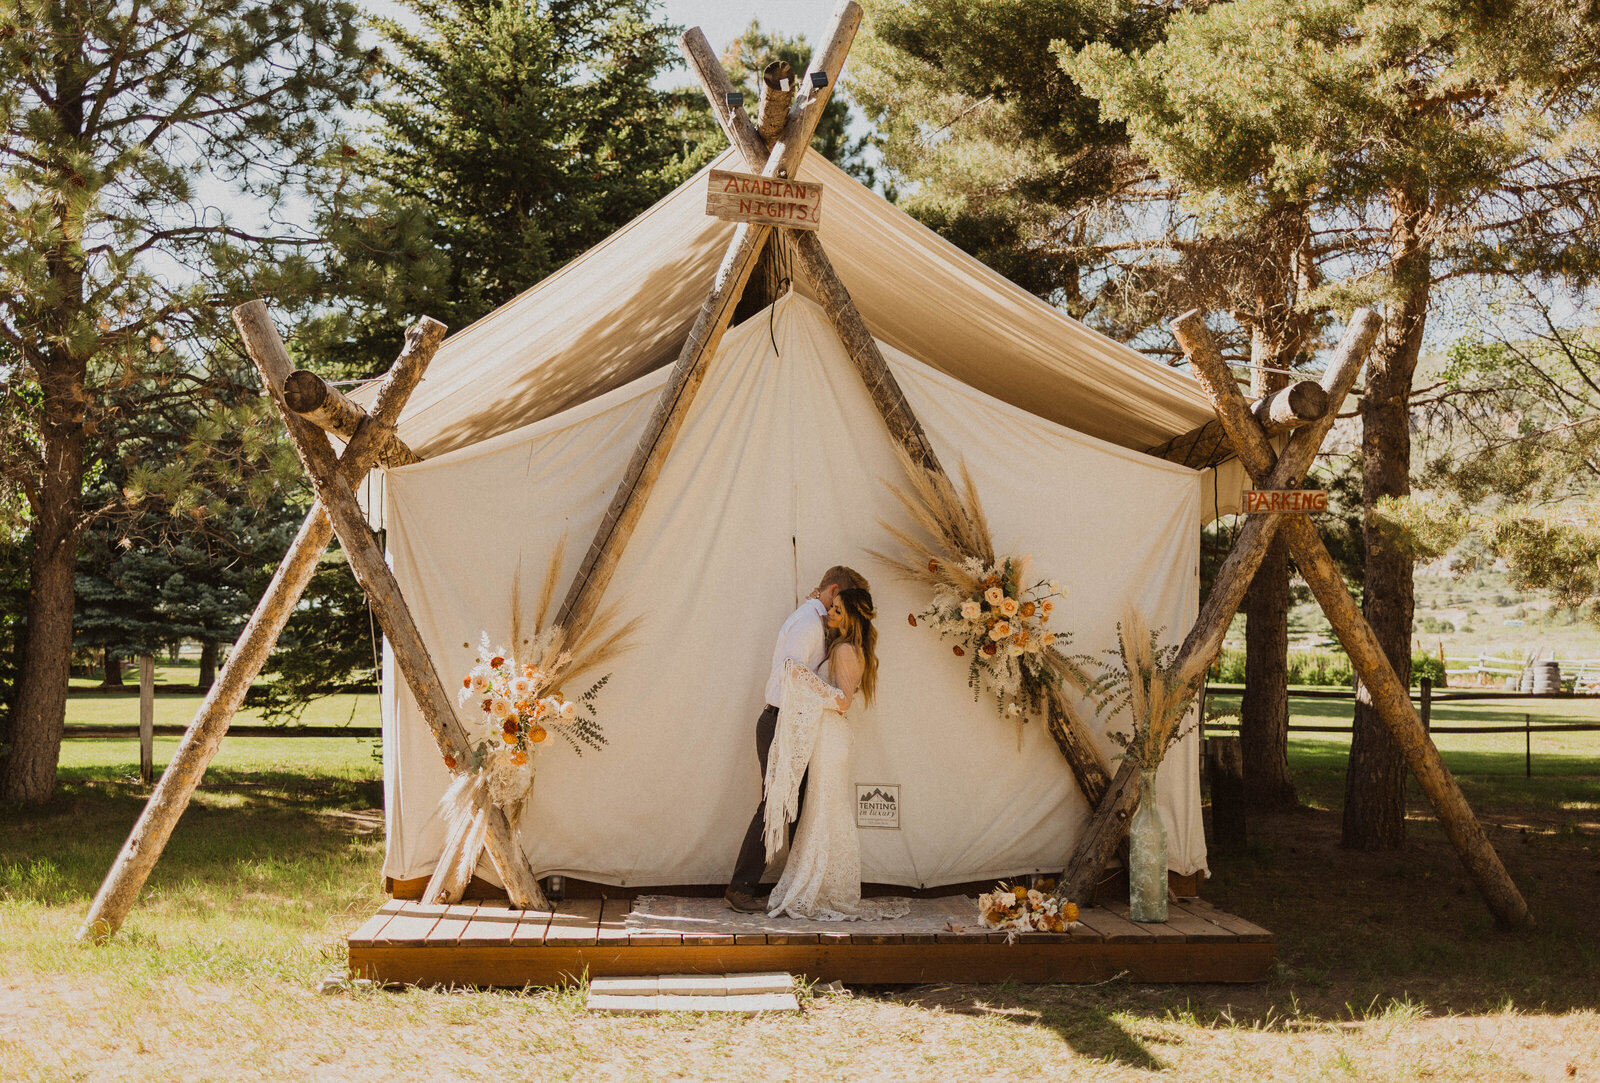 A couple in wedding attire at a boho canva tent